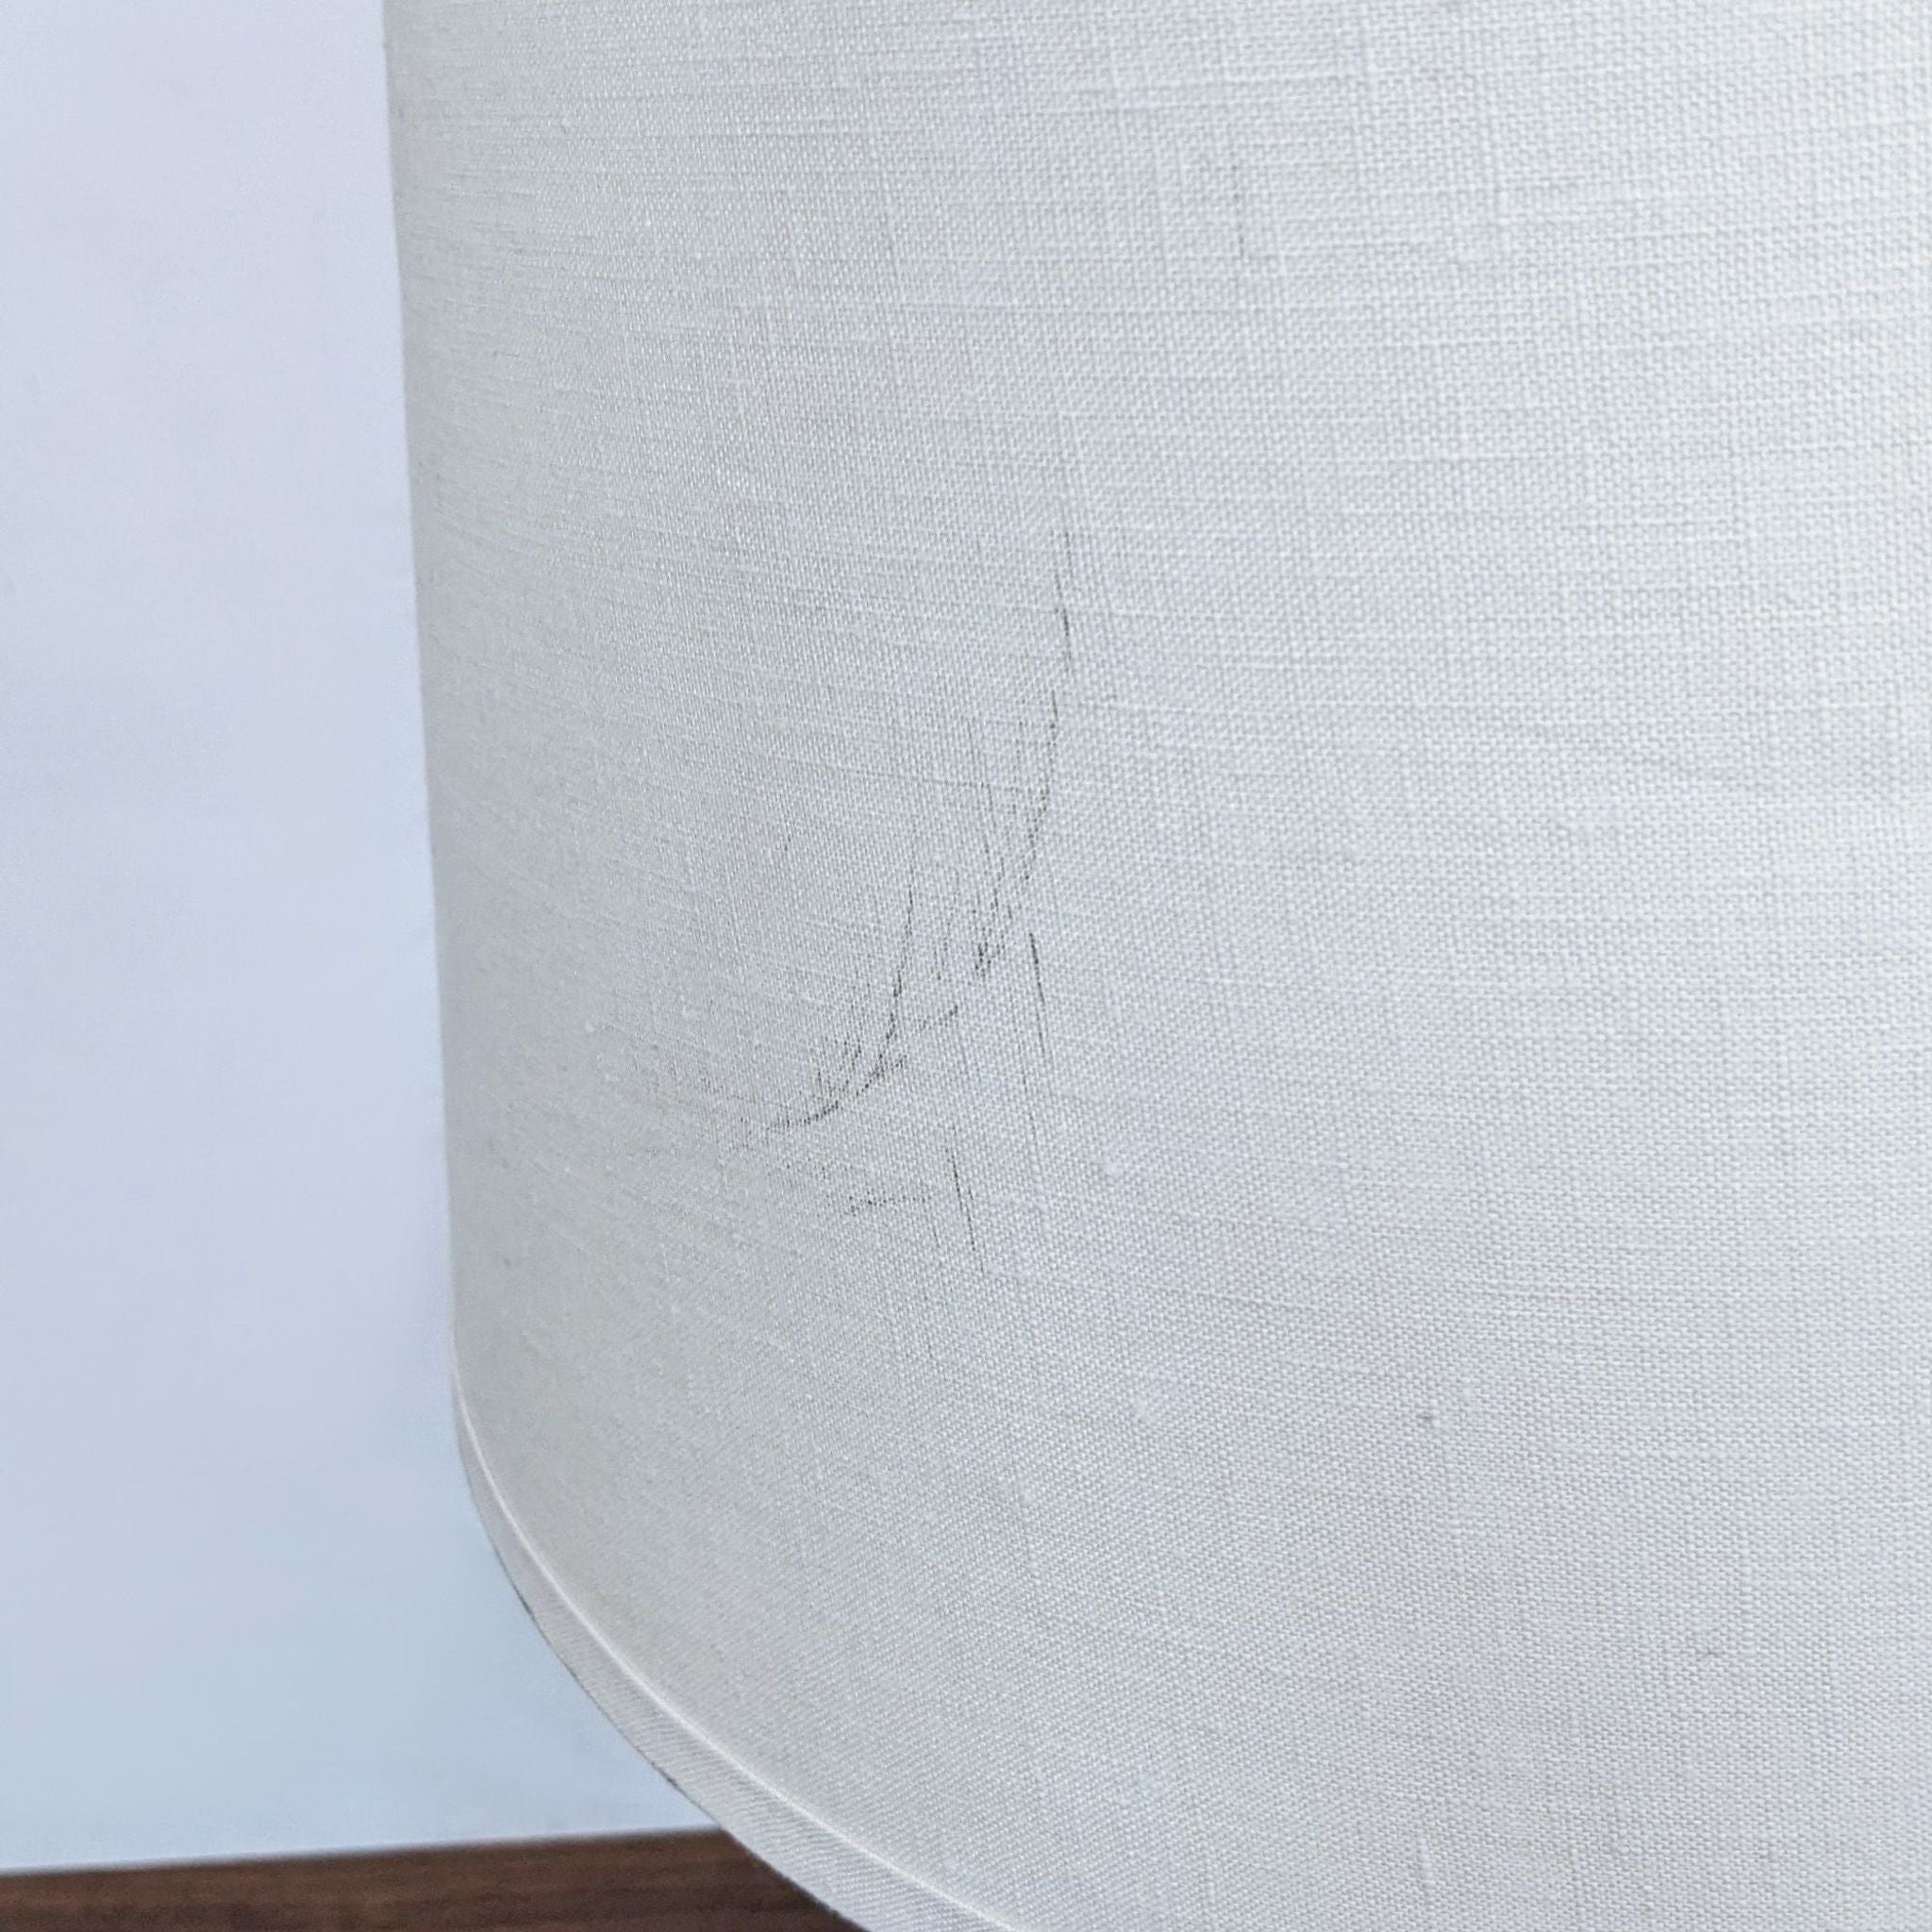 Close-up of a Reperch brand lampshade with a visible scratch on the fabric.